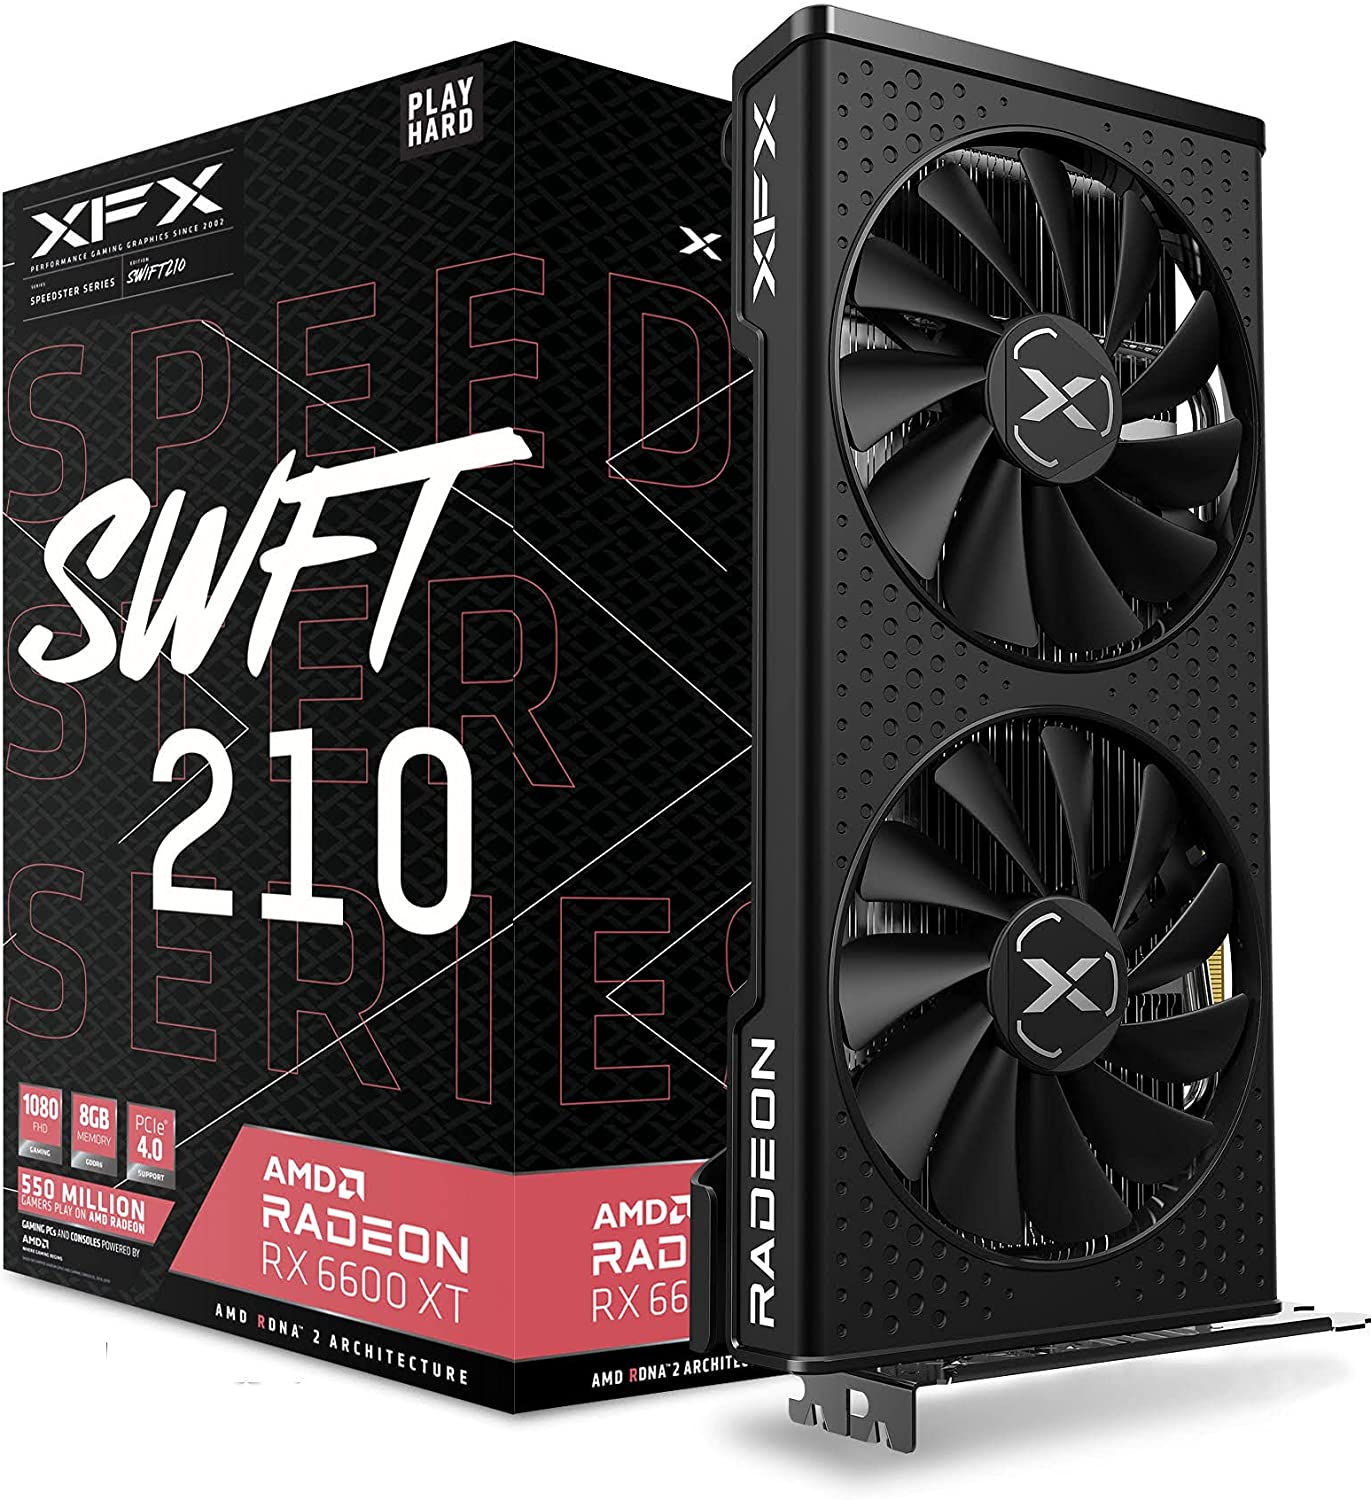 XFX Speedster SWFT210 Radeon RX 6600 XT CORE Gaming Graphics Card with 8GB GDDR6 $399.99 at Amazon